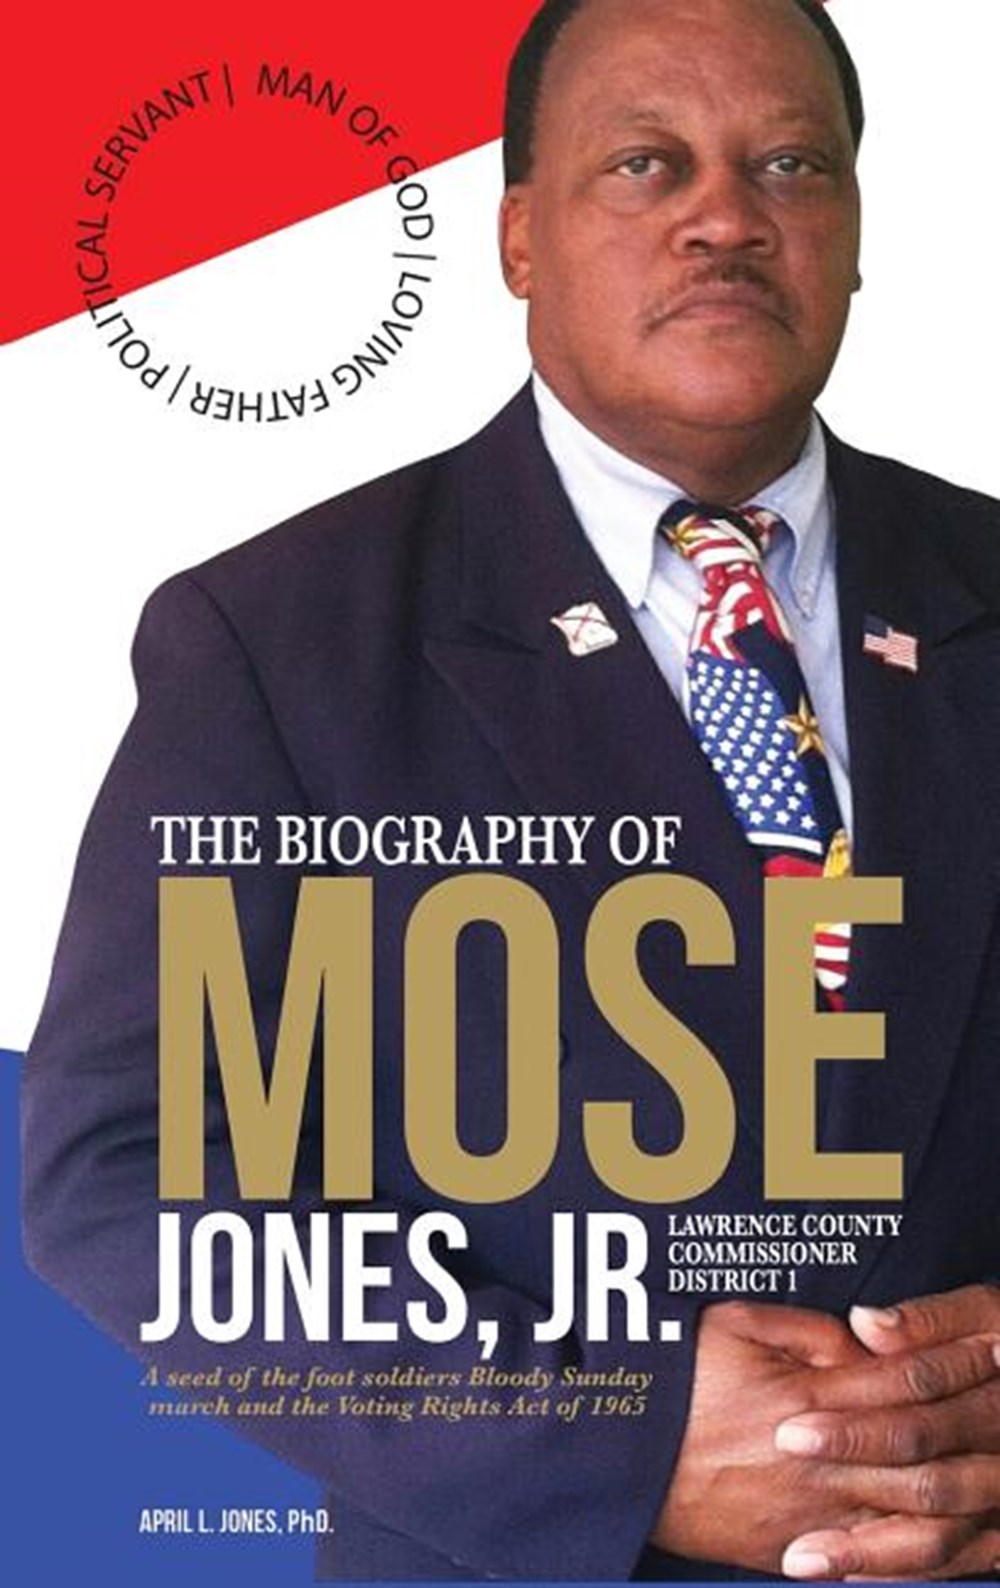 Biography of Mose Jones Jr., Lawrence County Commissioner of District 1 A seed of the foot soldiers 